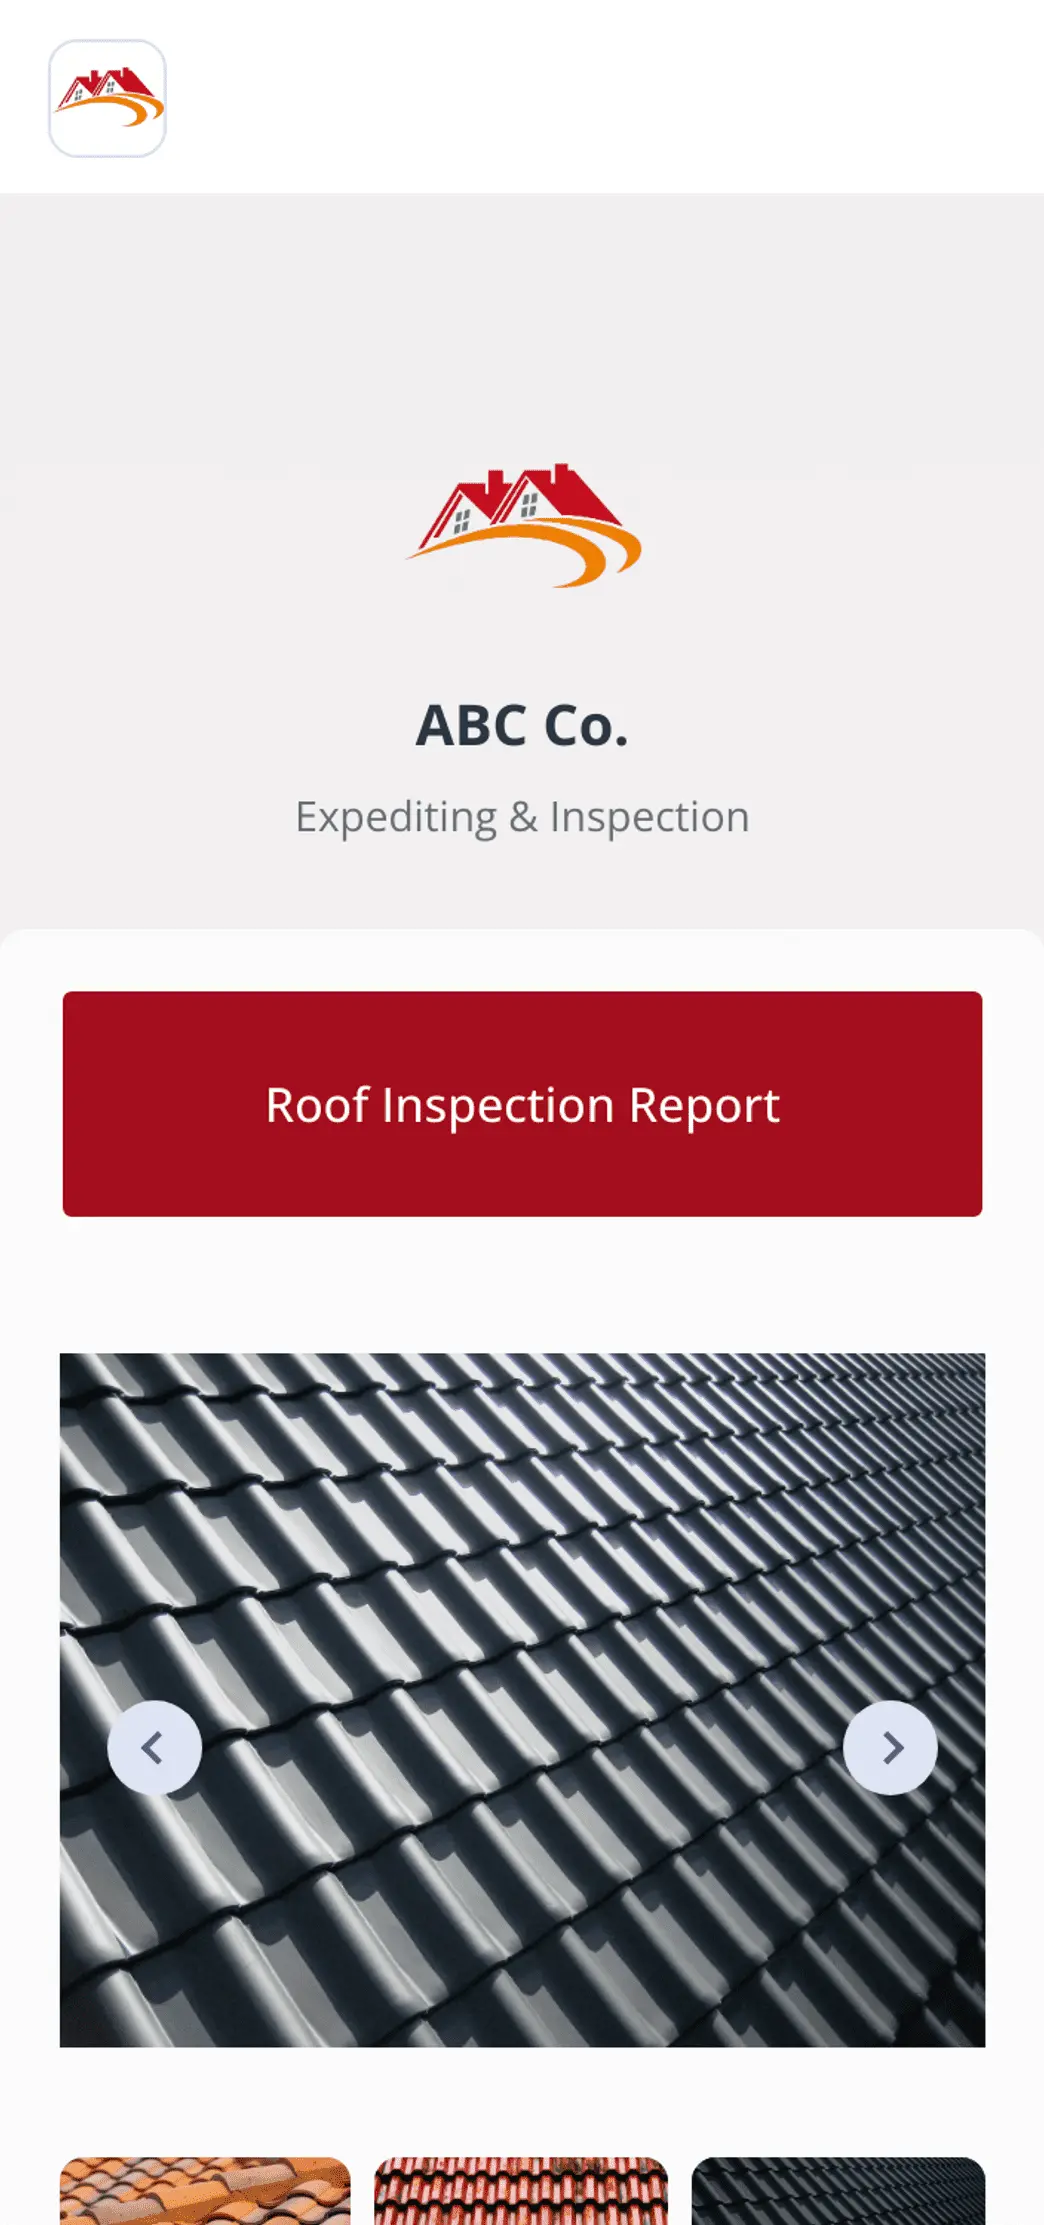 Roof Inspection App